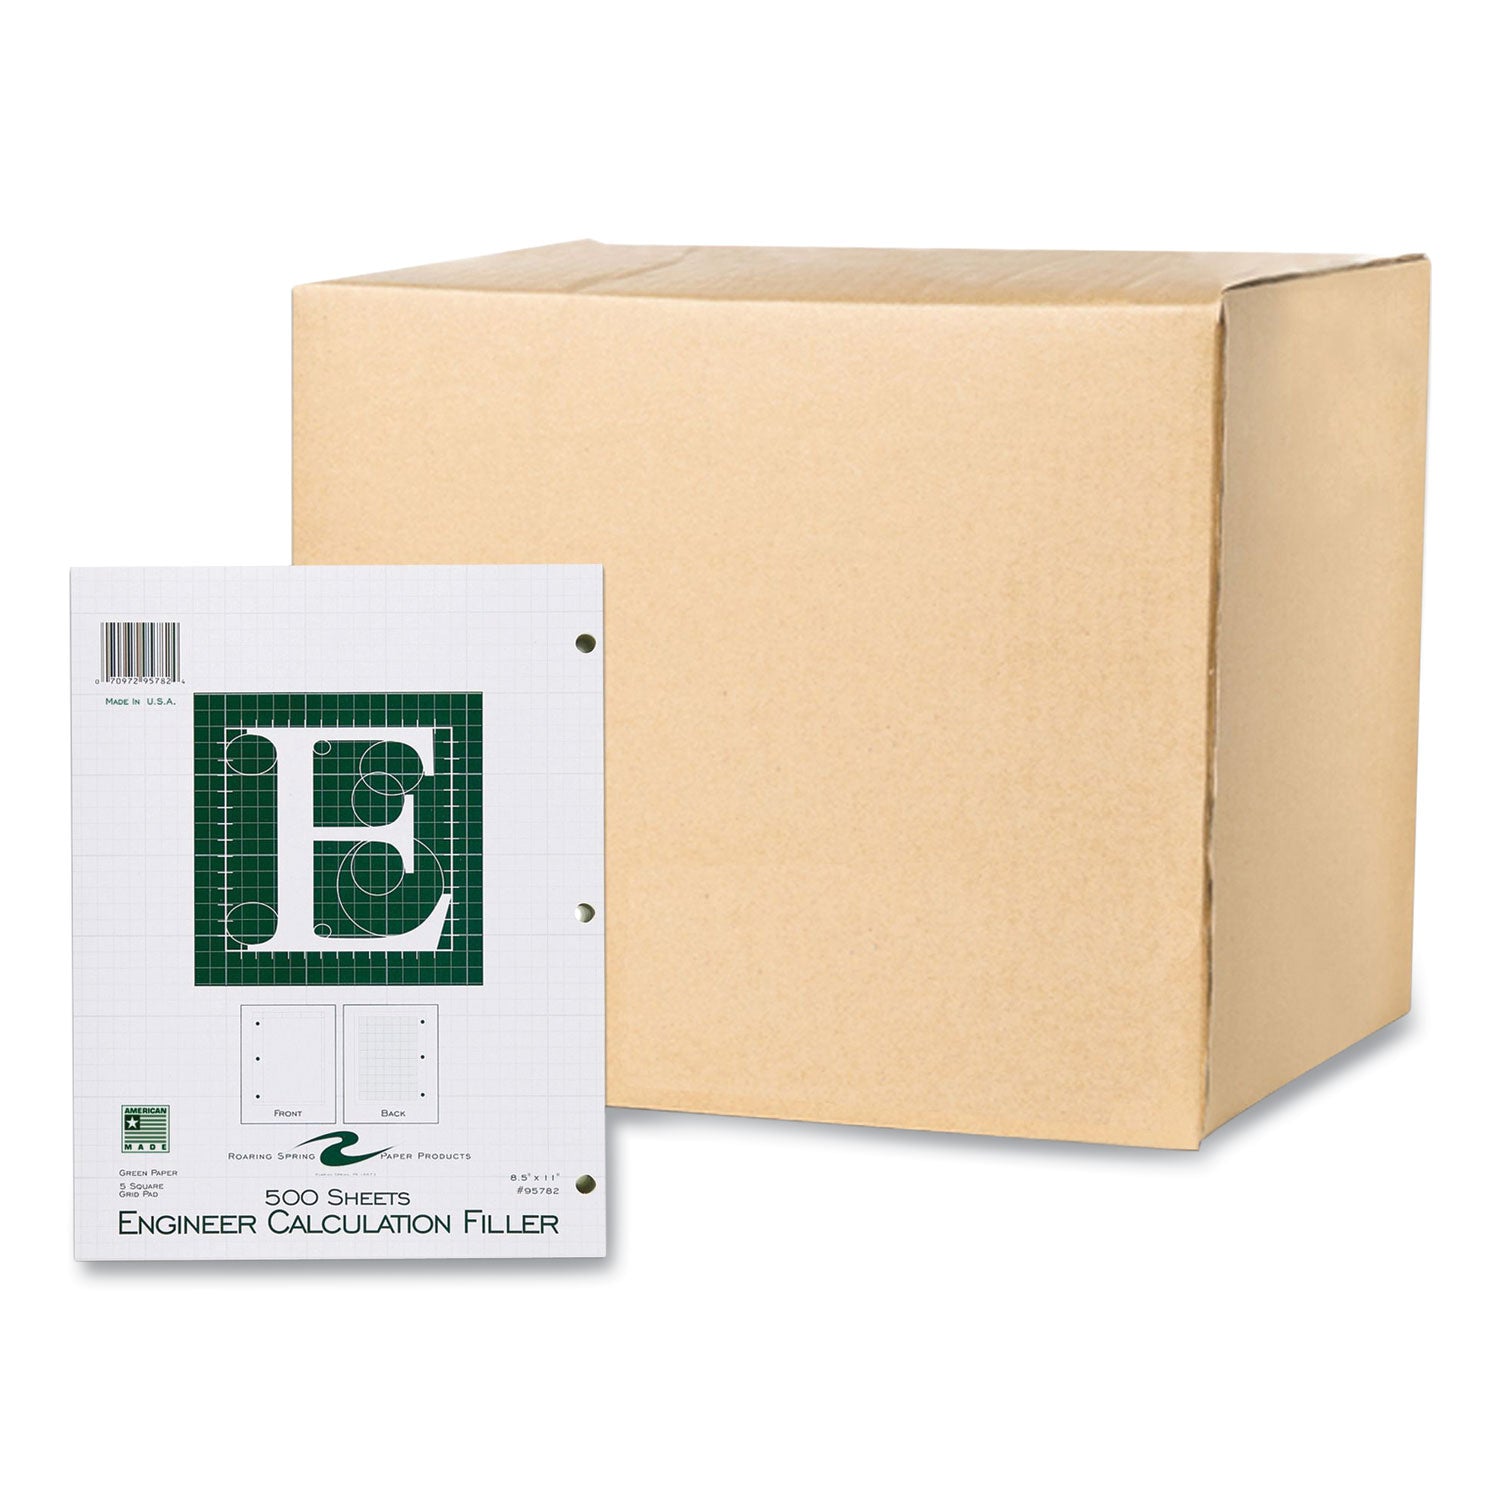 engineer-filler-paper-3-hole-frame-format-quad-rule-5-sq-in-1-sq-in-500-sheets-pk-5-carton-ships-in-4-6-business-days_roa95782cs - 2